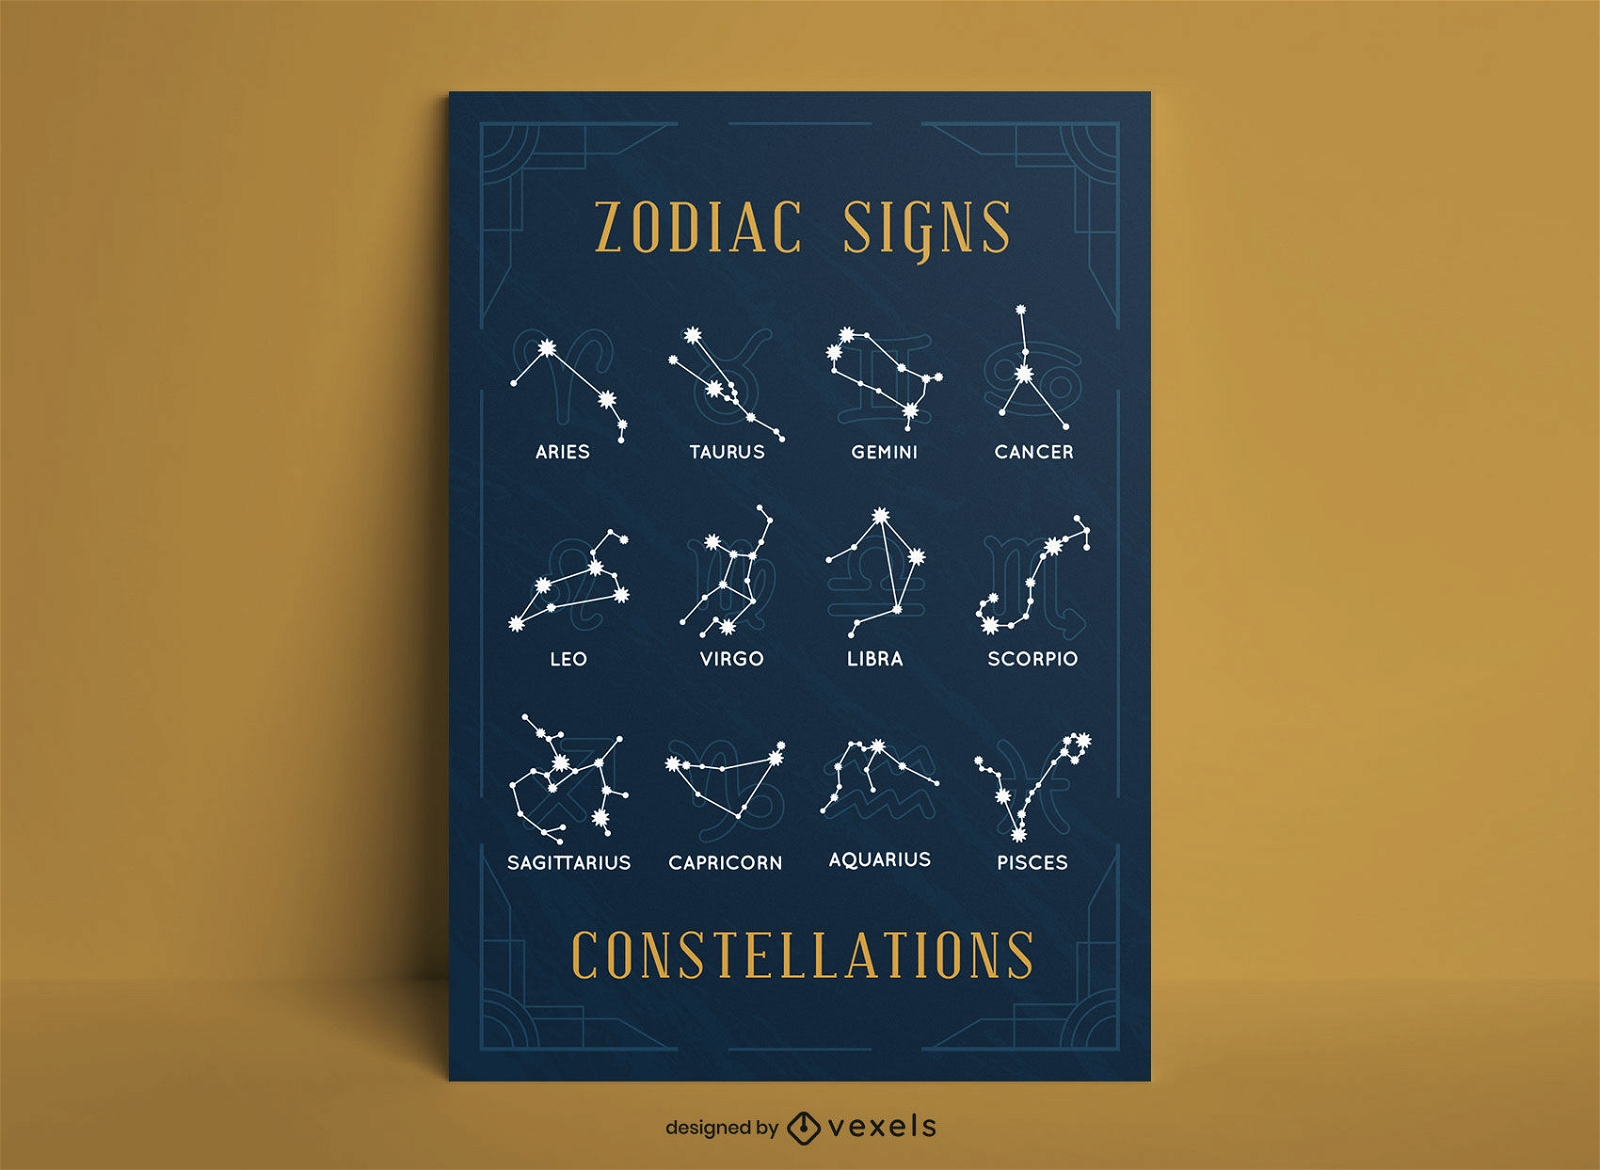 Zodiac signs constellations poster design